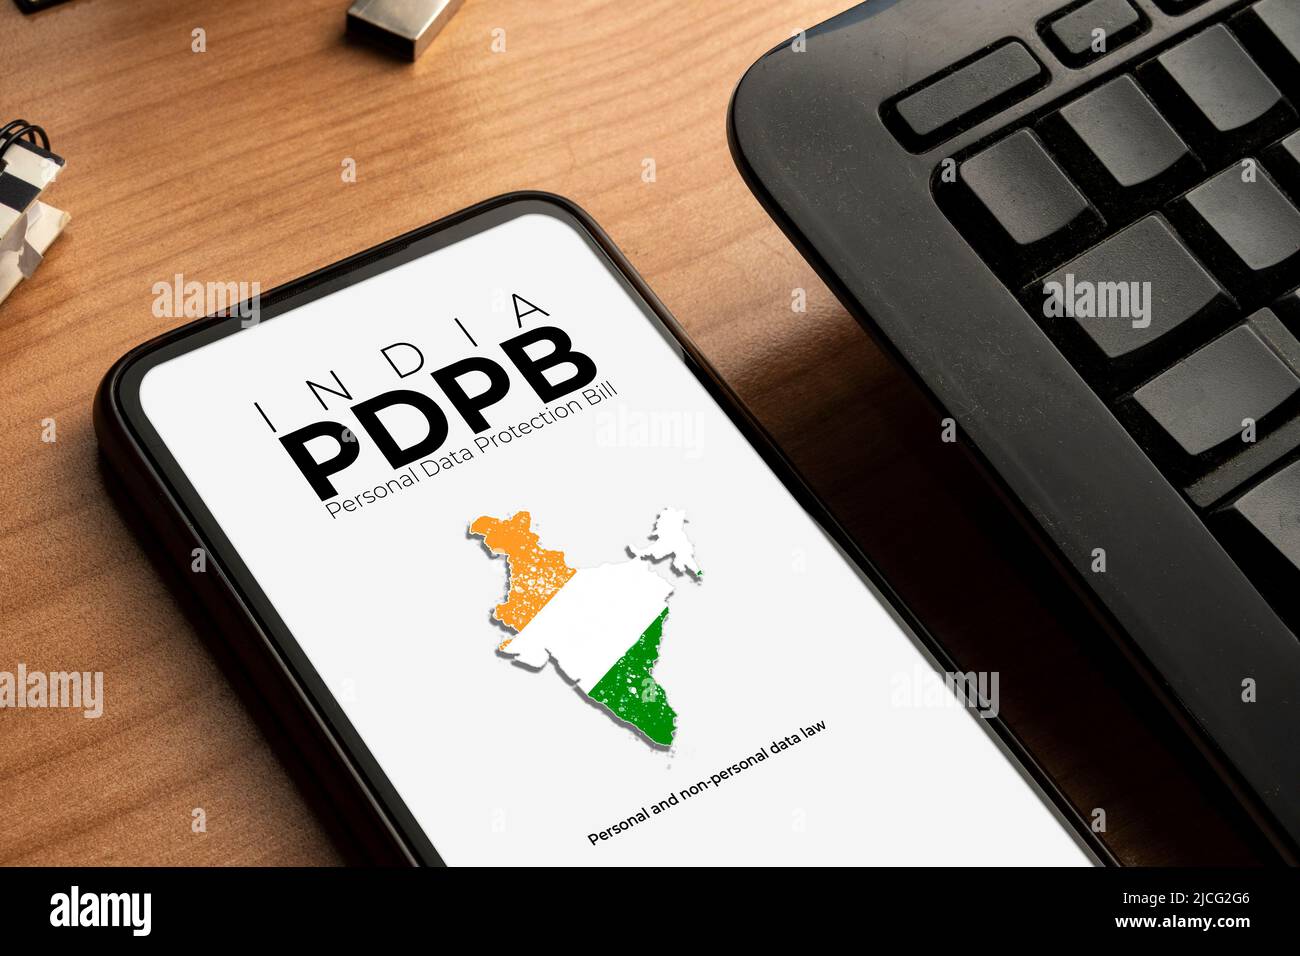 LGPD (indian personal and non personal data law) concept: smartphone with an imaginary page showing a link to read the Indian Personal Data Protection Stock Photo